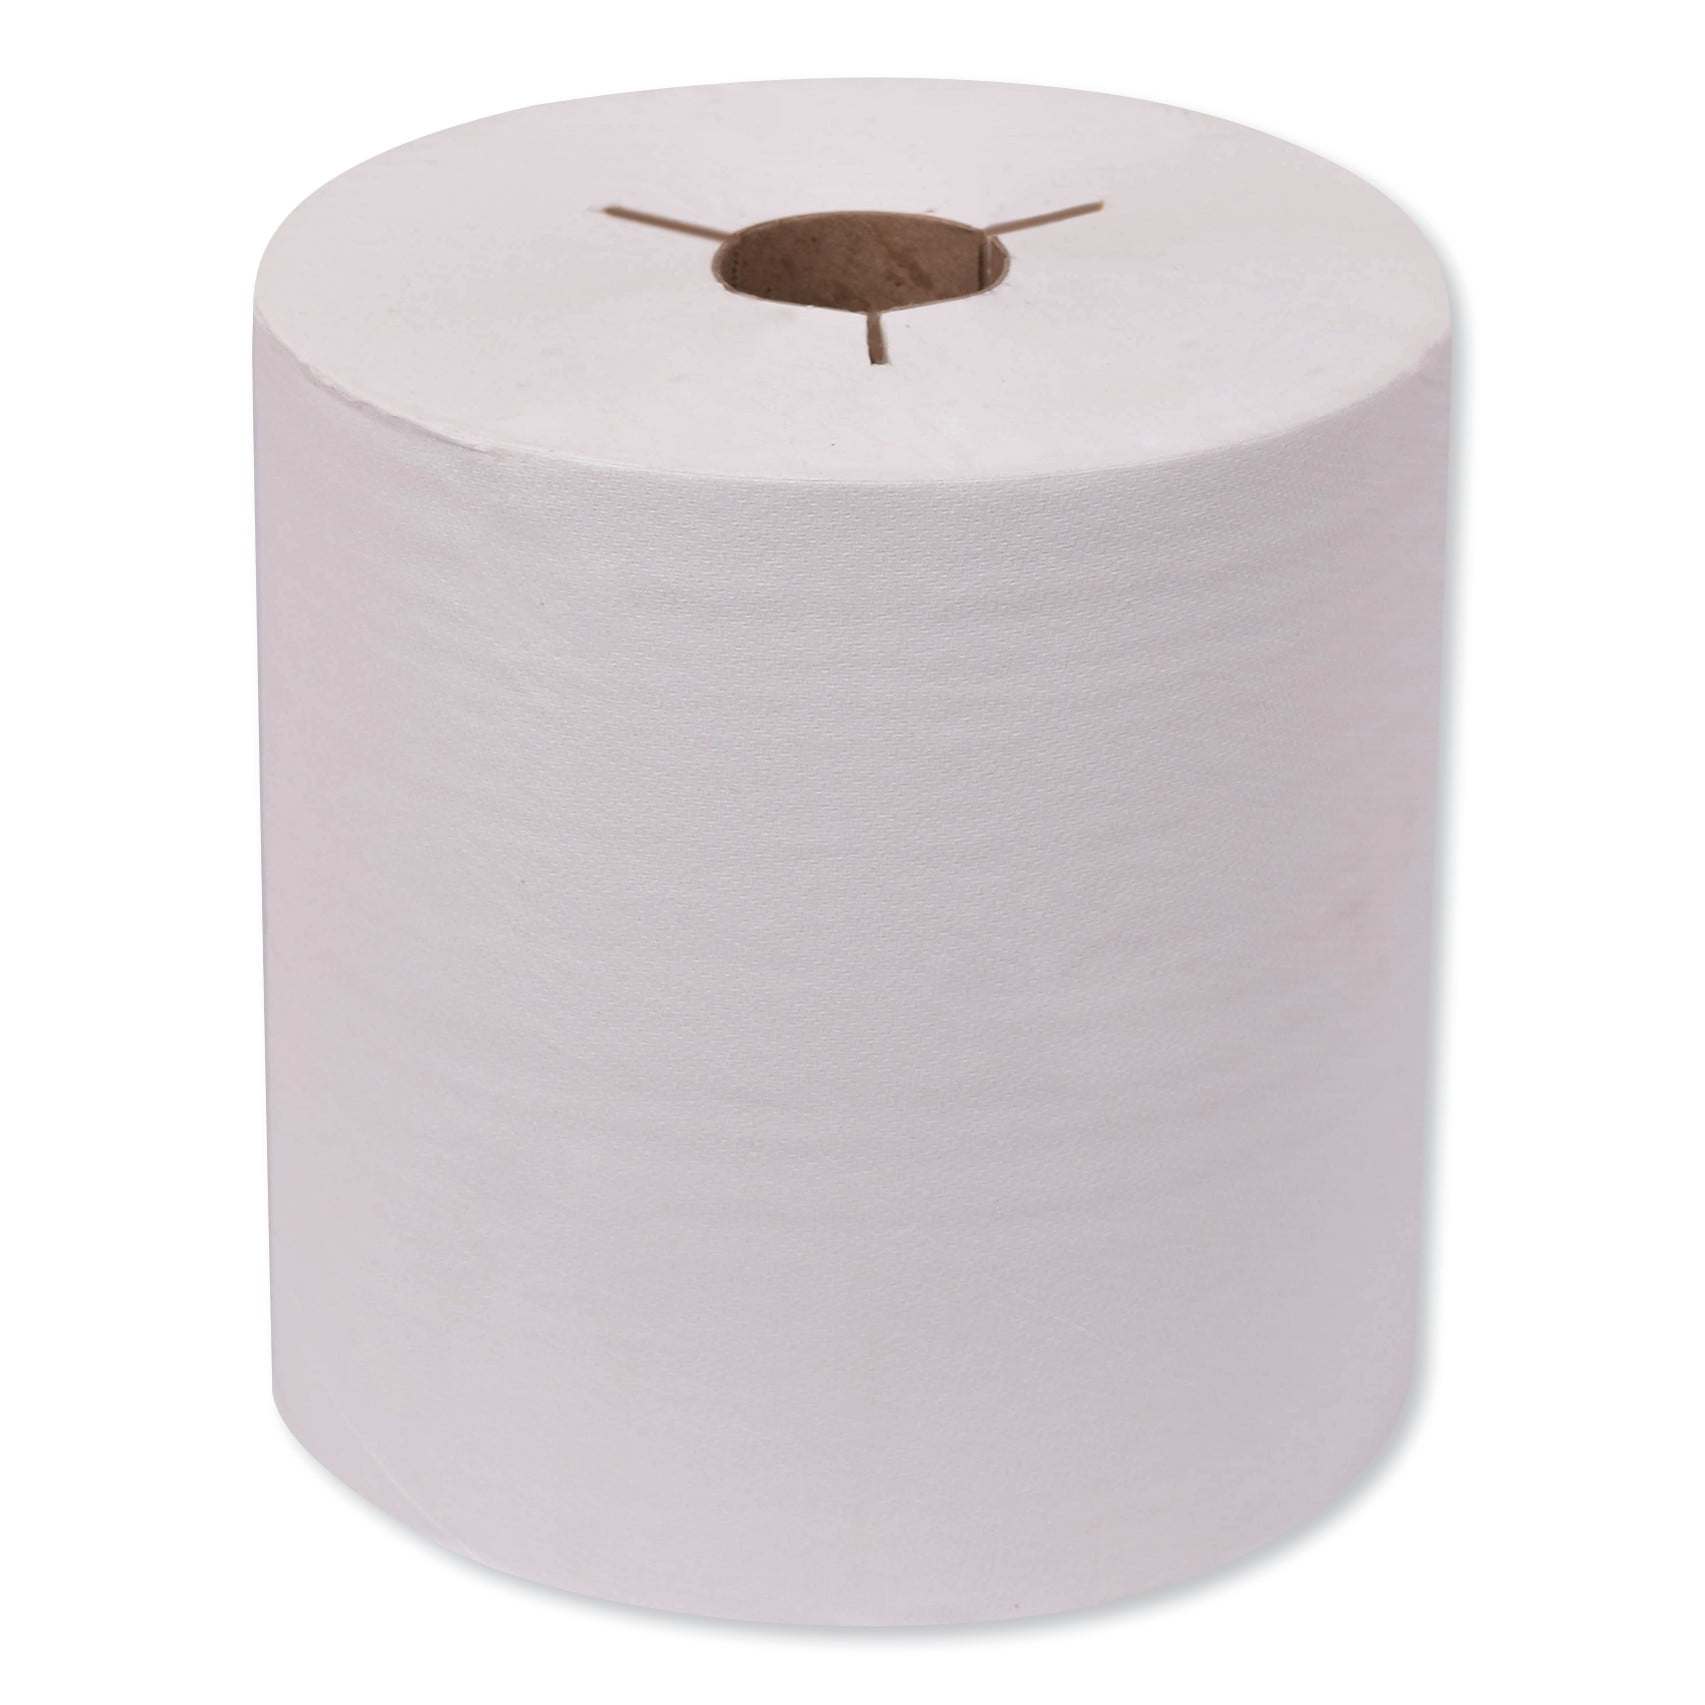 Unperforated Paper Towel Roll, White 8 x 350' Rolls, 12 Rolls/Case -  BWK6250